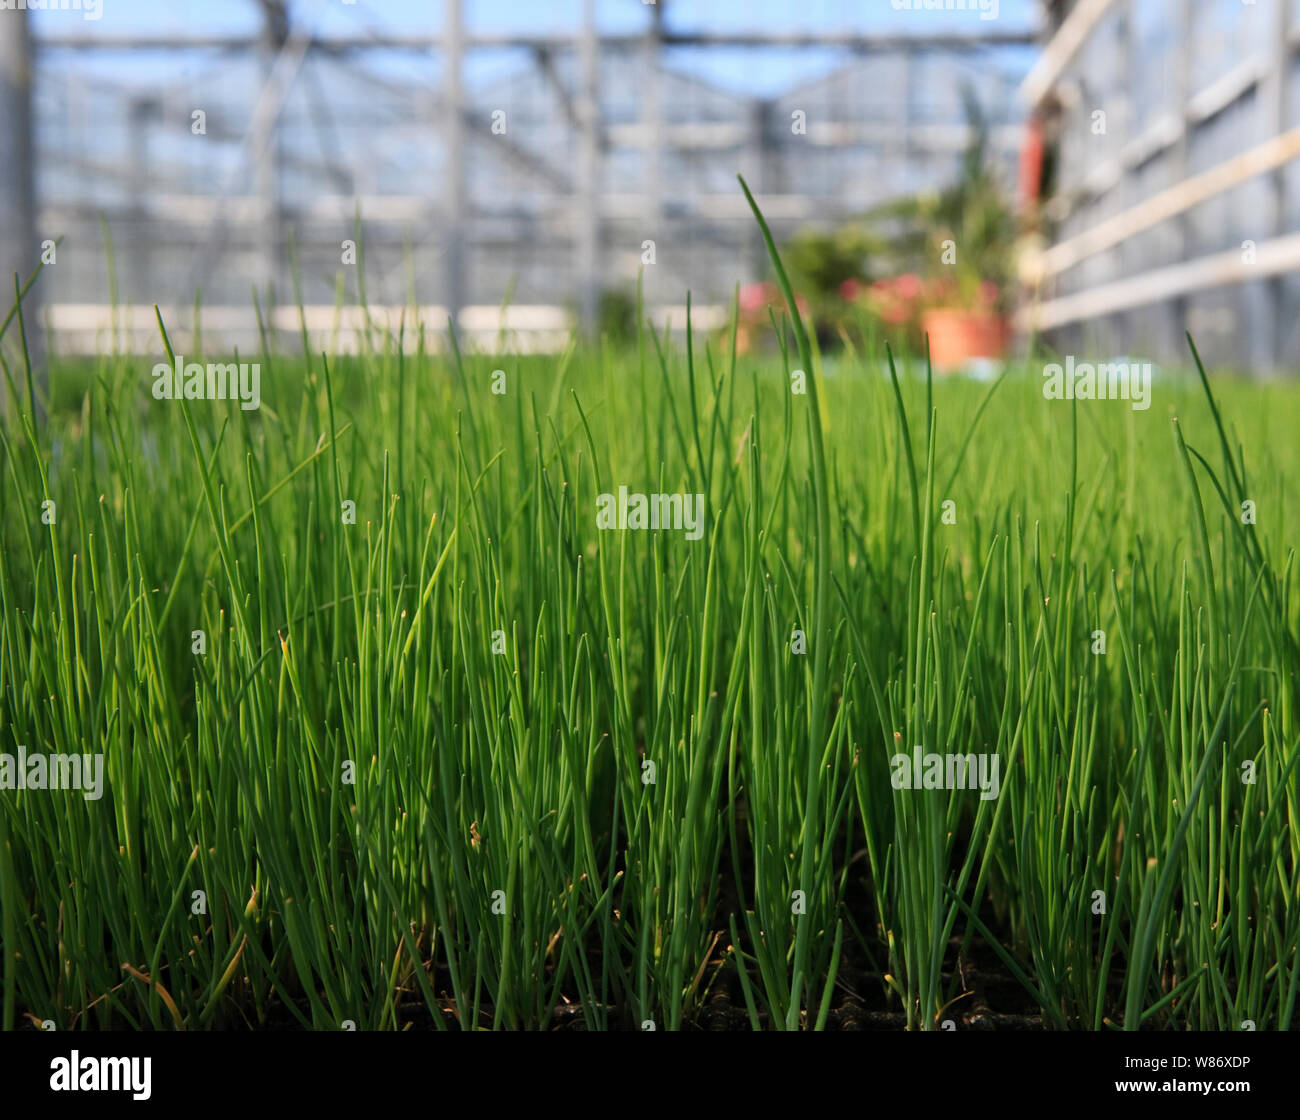 chive herb plants growing in a commercial greenhouse Stock Photo